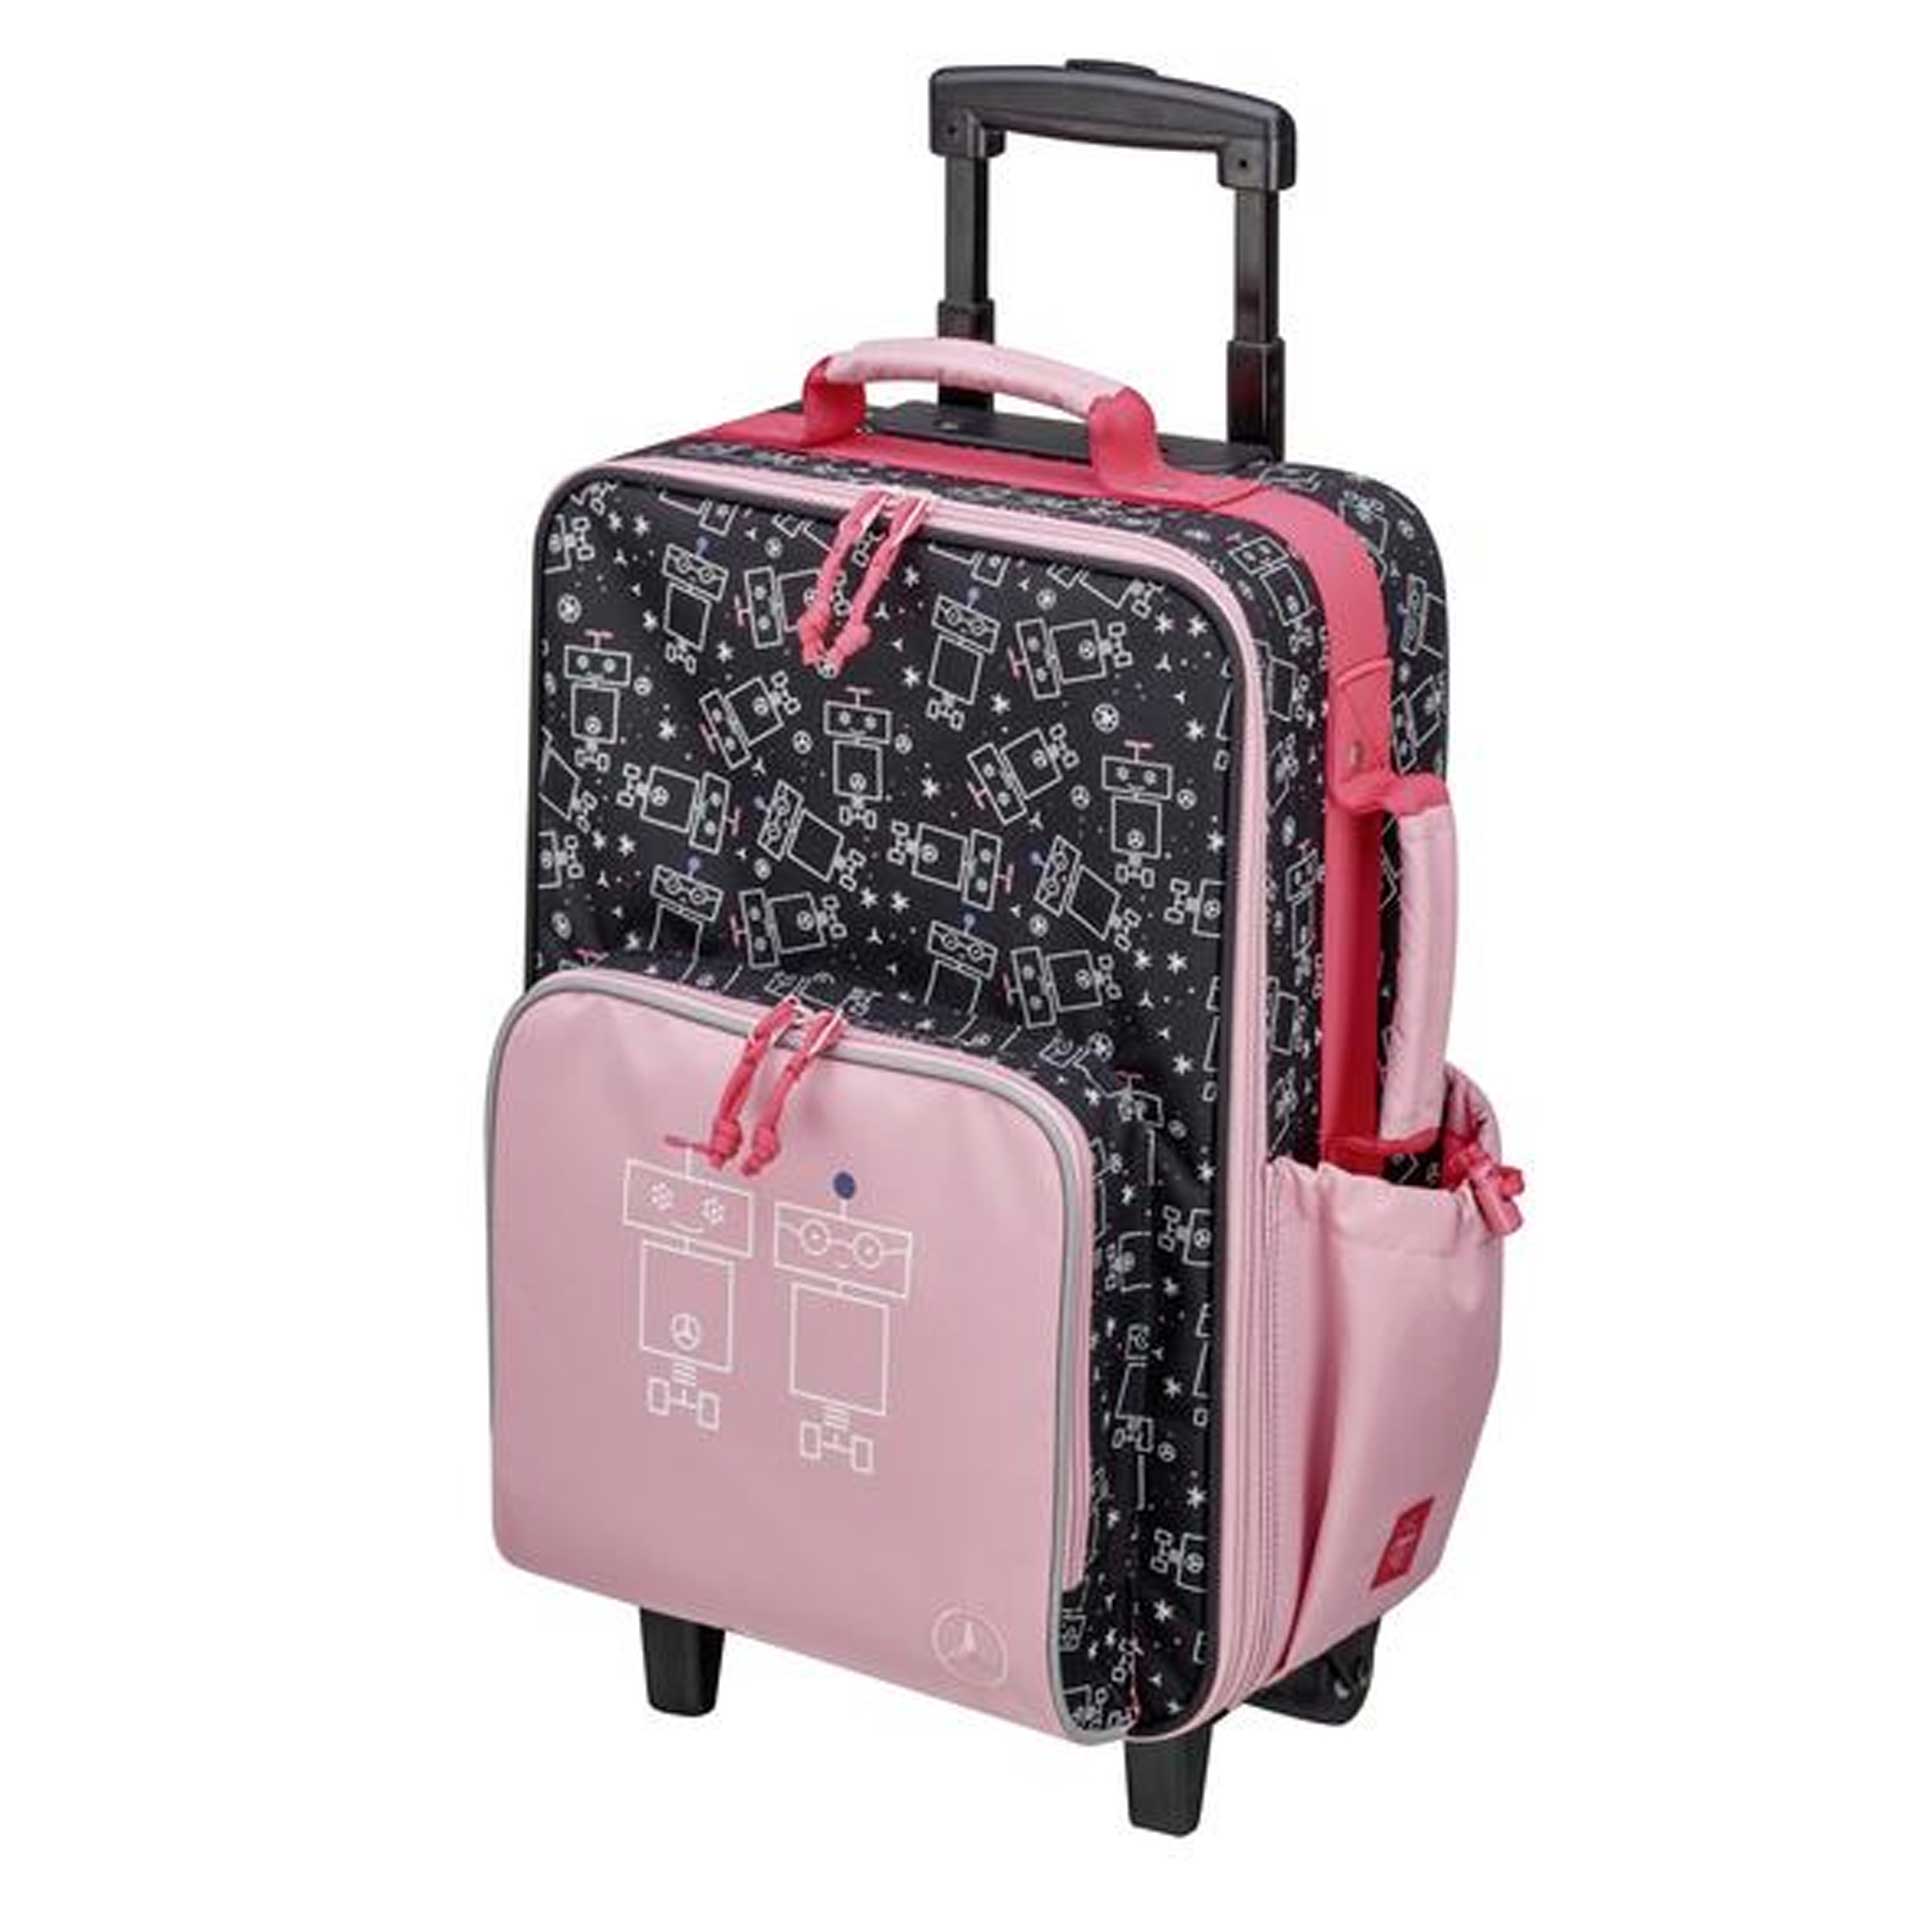 Mercedes-Benz Trolley Kinderkoffer rosa